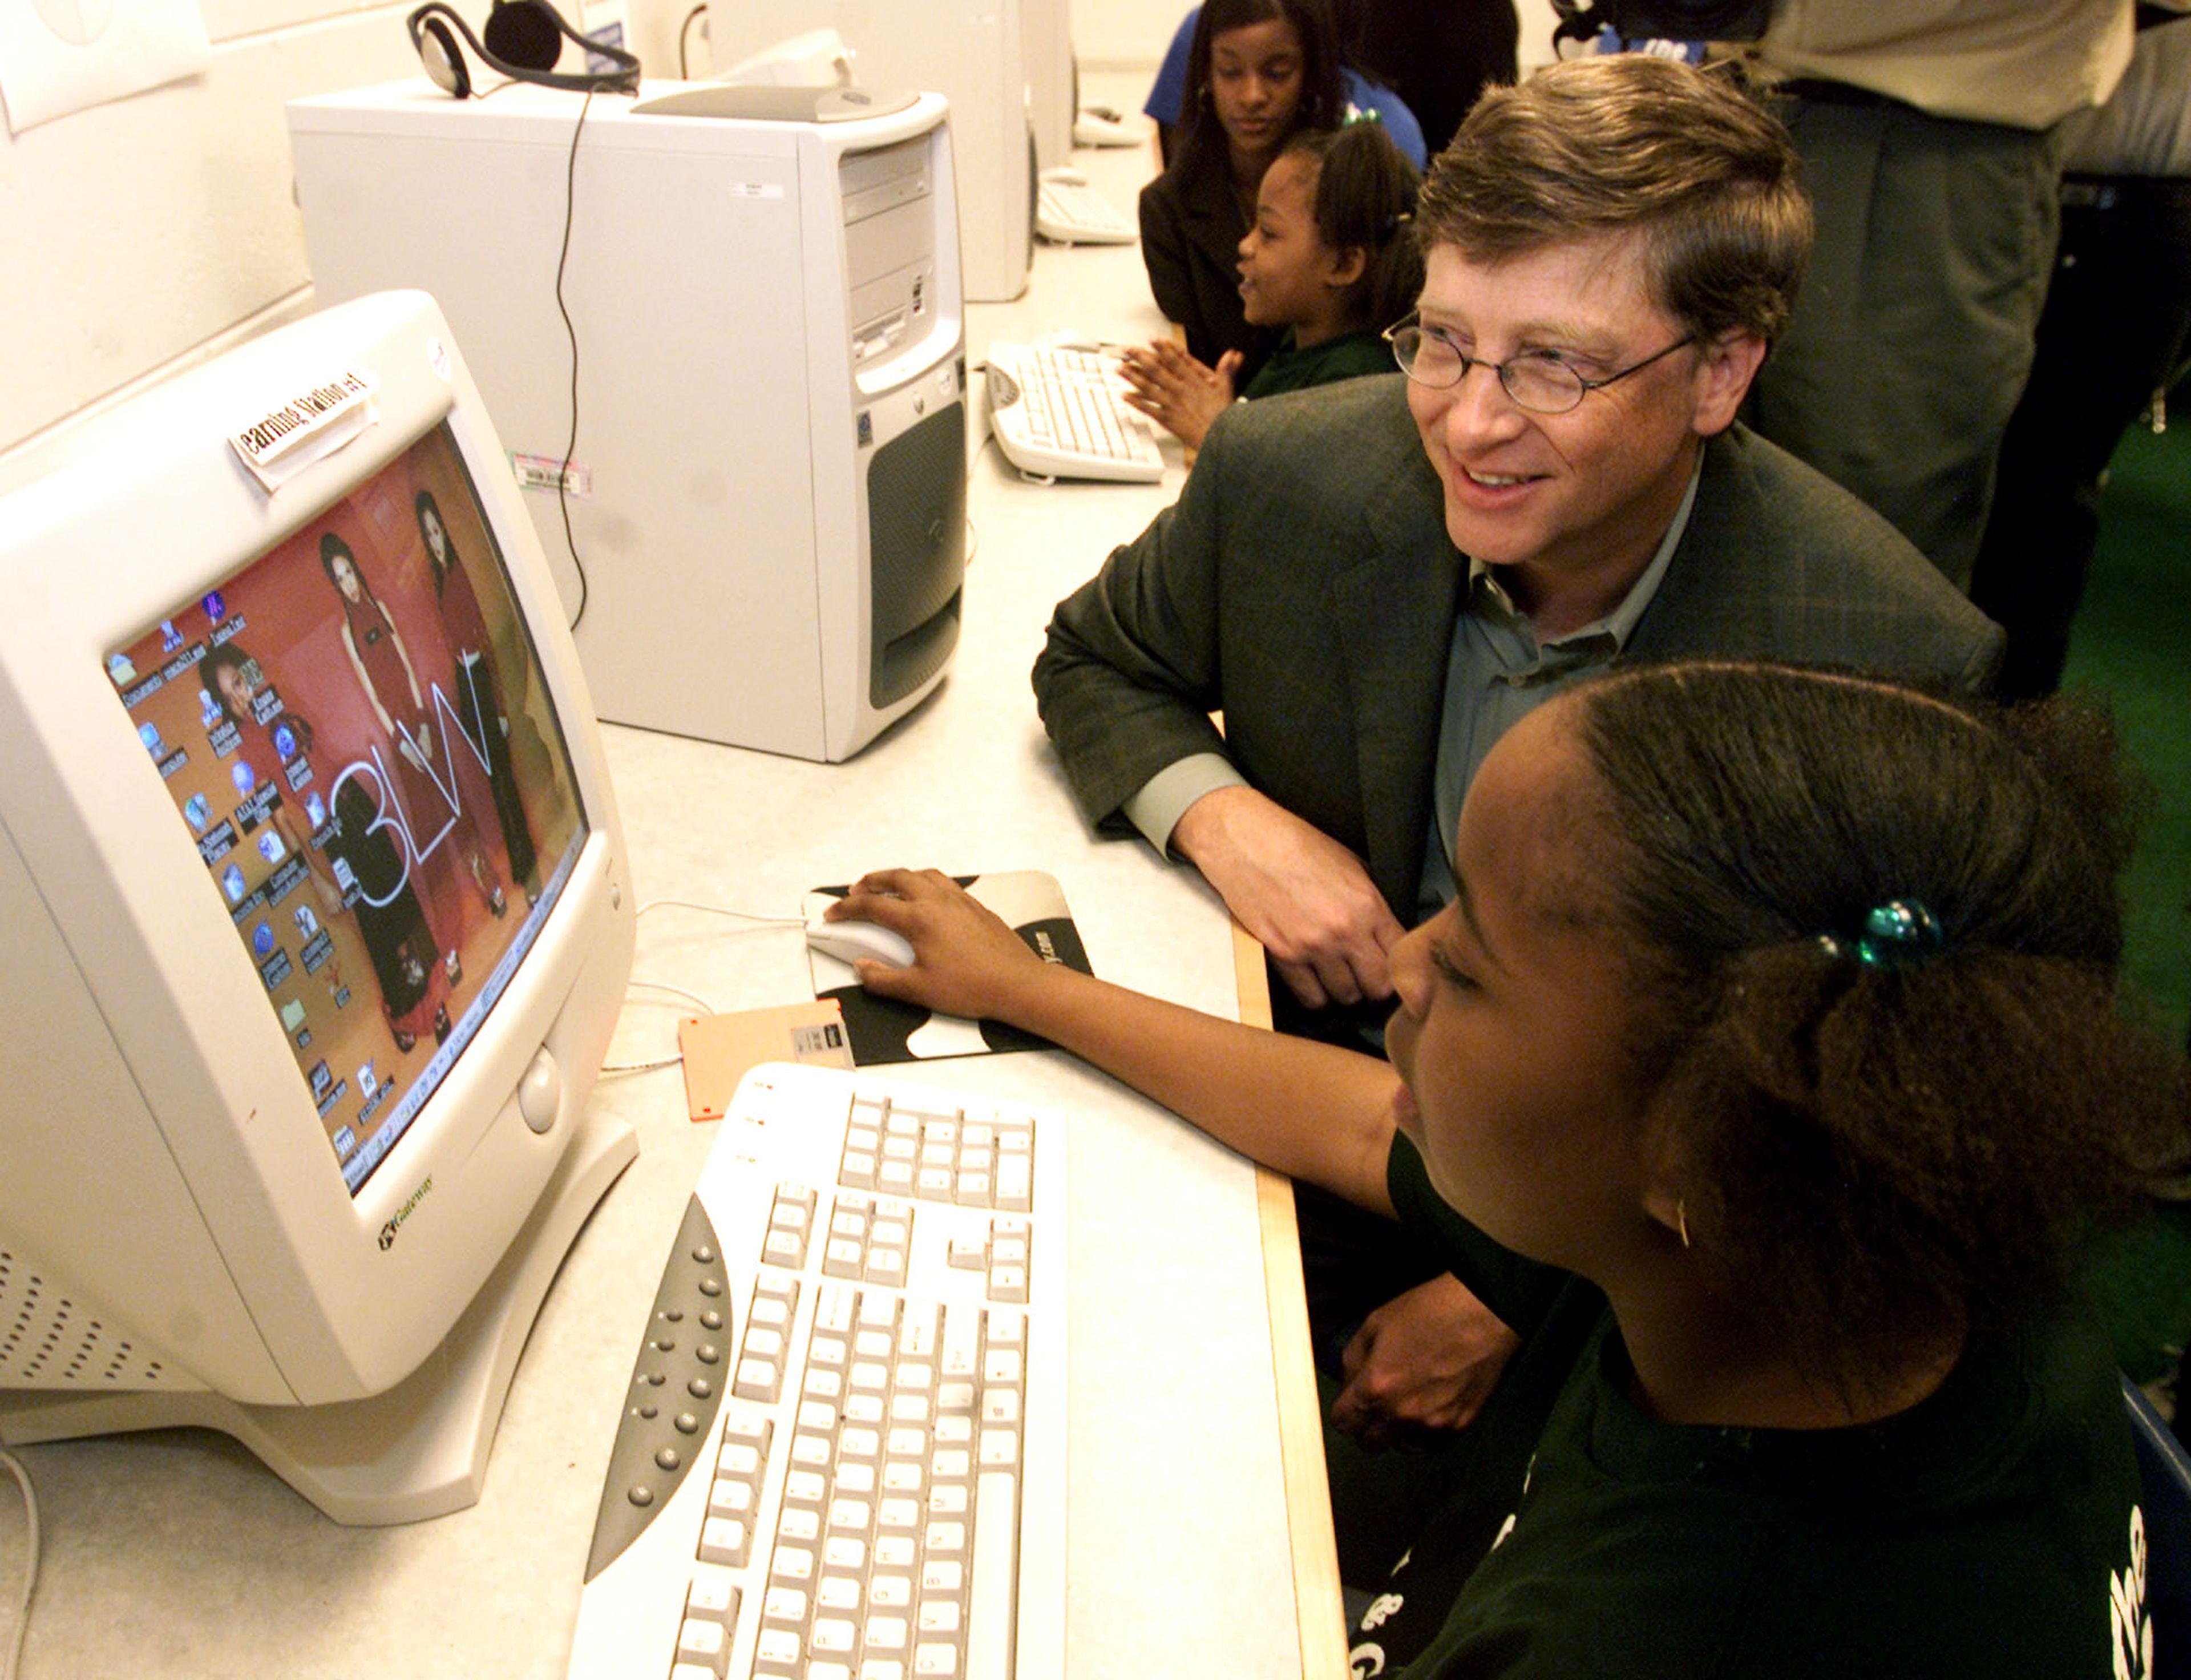 Bill Gates Showing A New Show To A Girl In 2002.